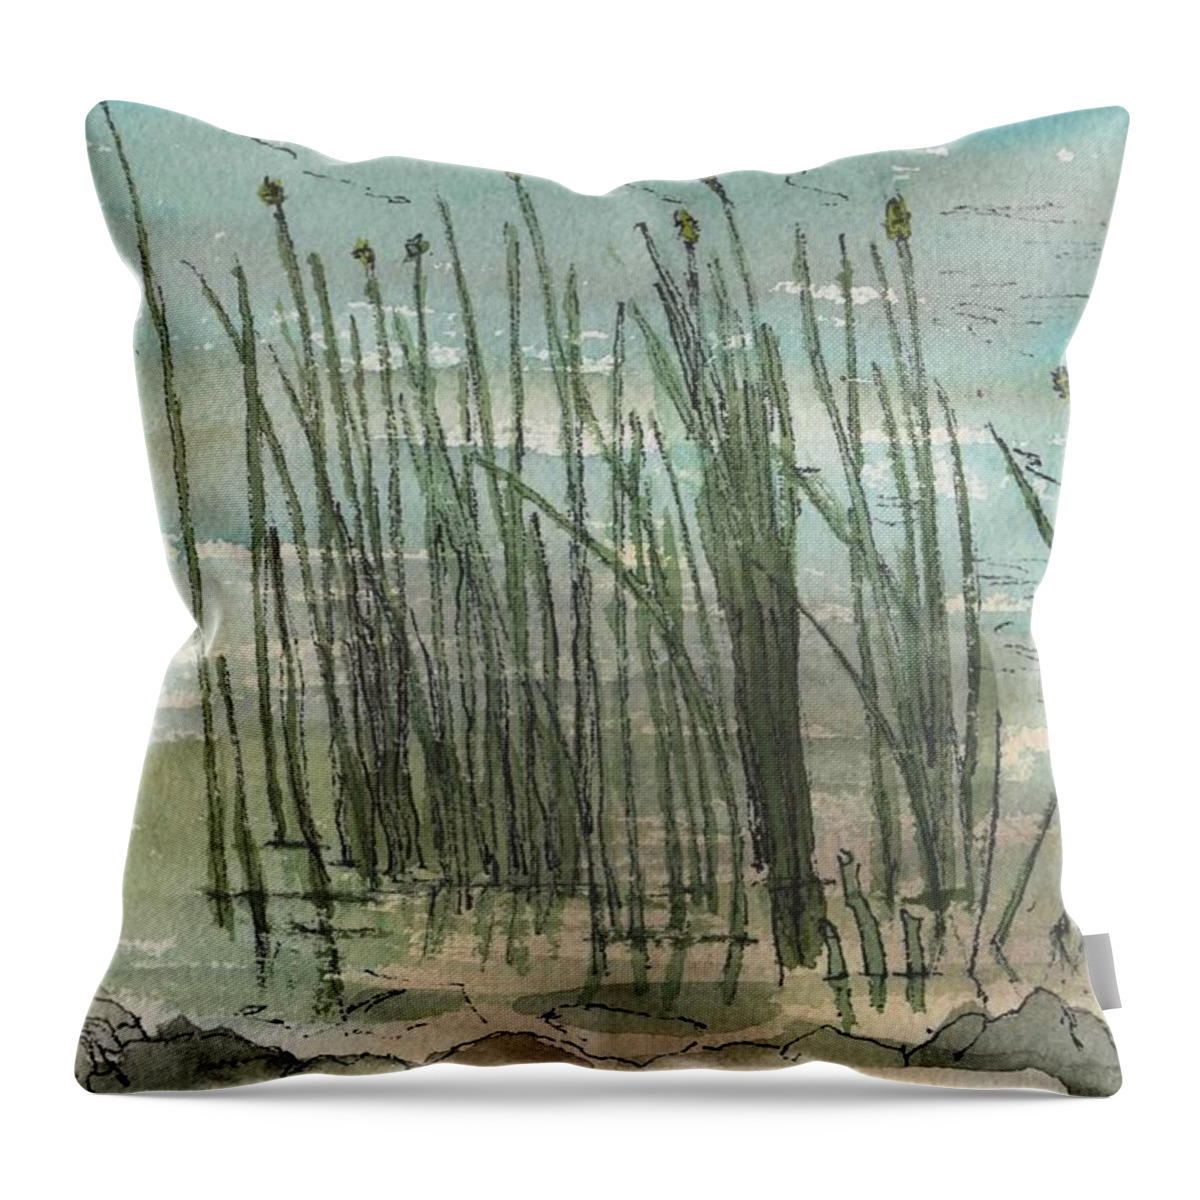 Reeds Throw Pillow featuring the painting Reeds by Caroline Henry